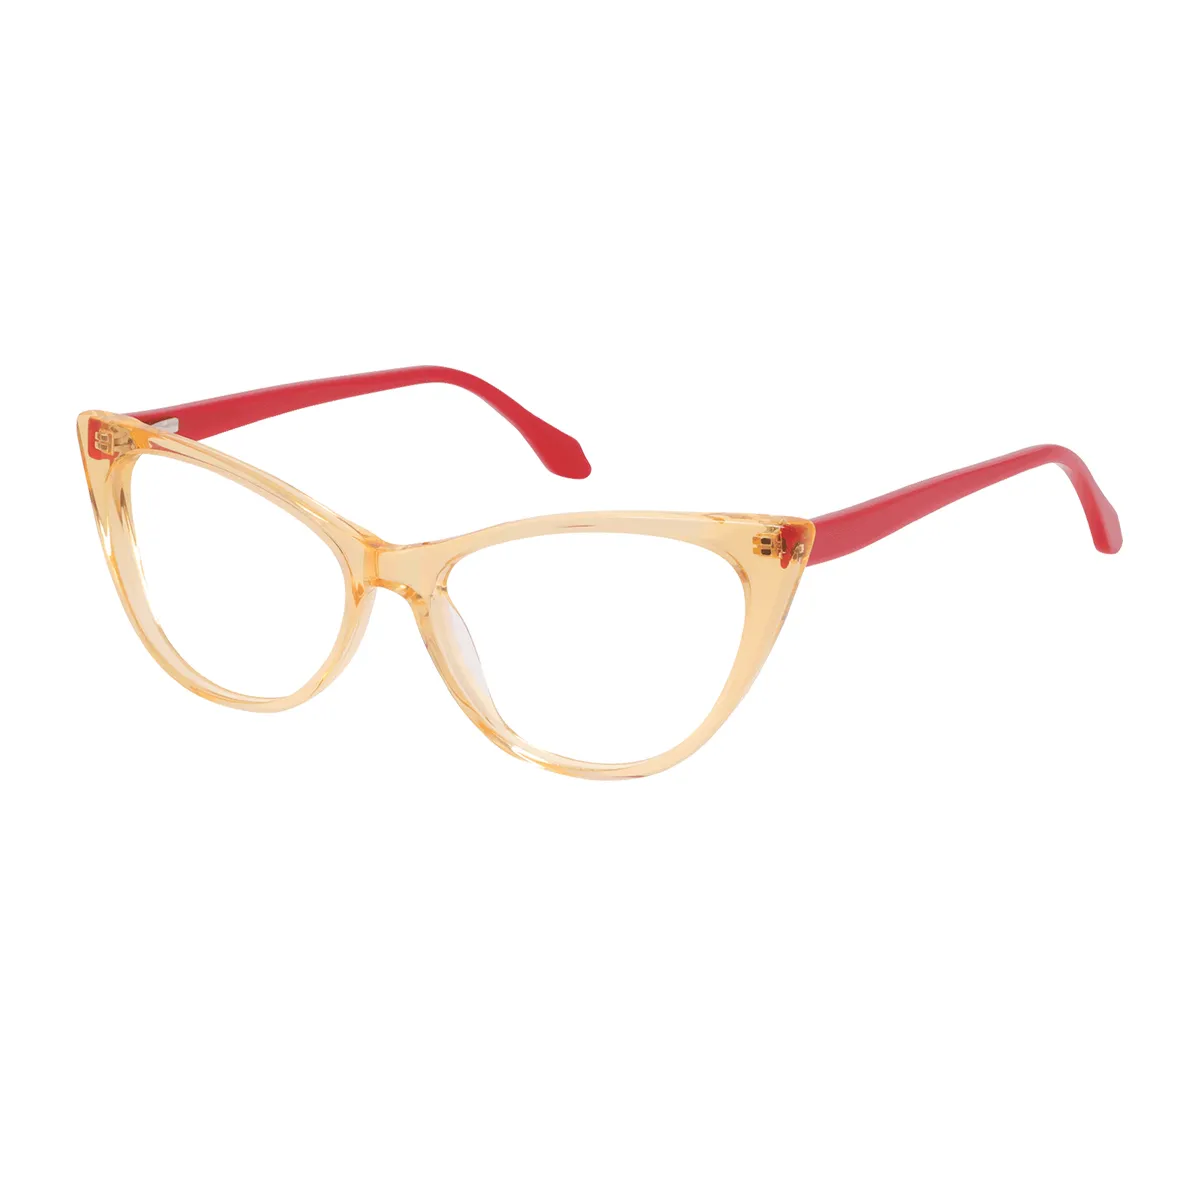 Angelica - Cat-eye Yellow-Red Glasses for Women - EFE